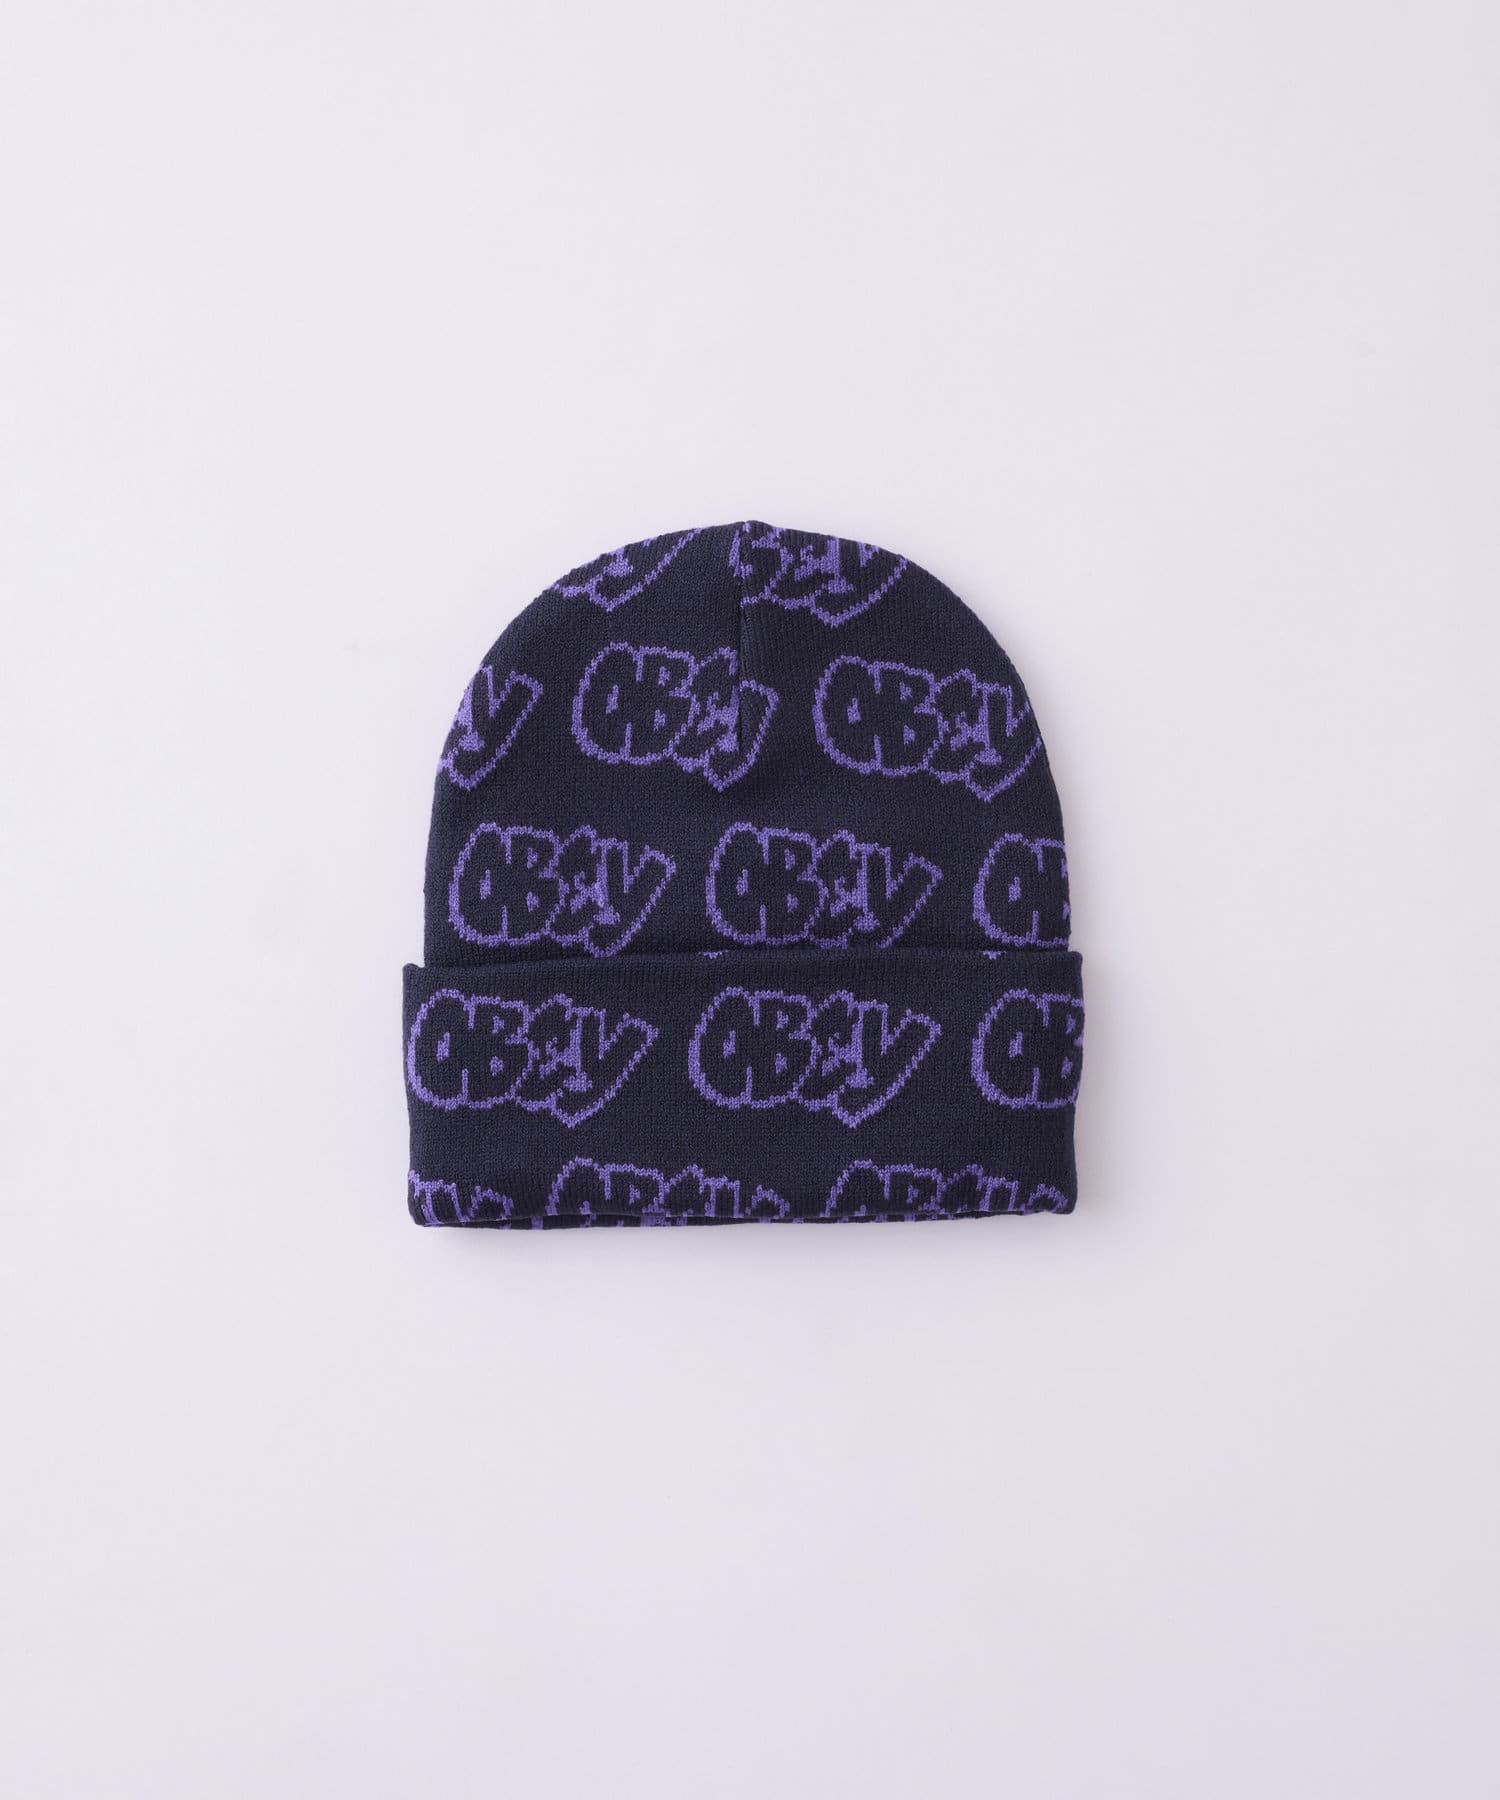 WHO’S WHO gallery(フーズフーギャラリー) OBEY GOOD TIMES BEANIE